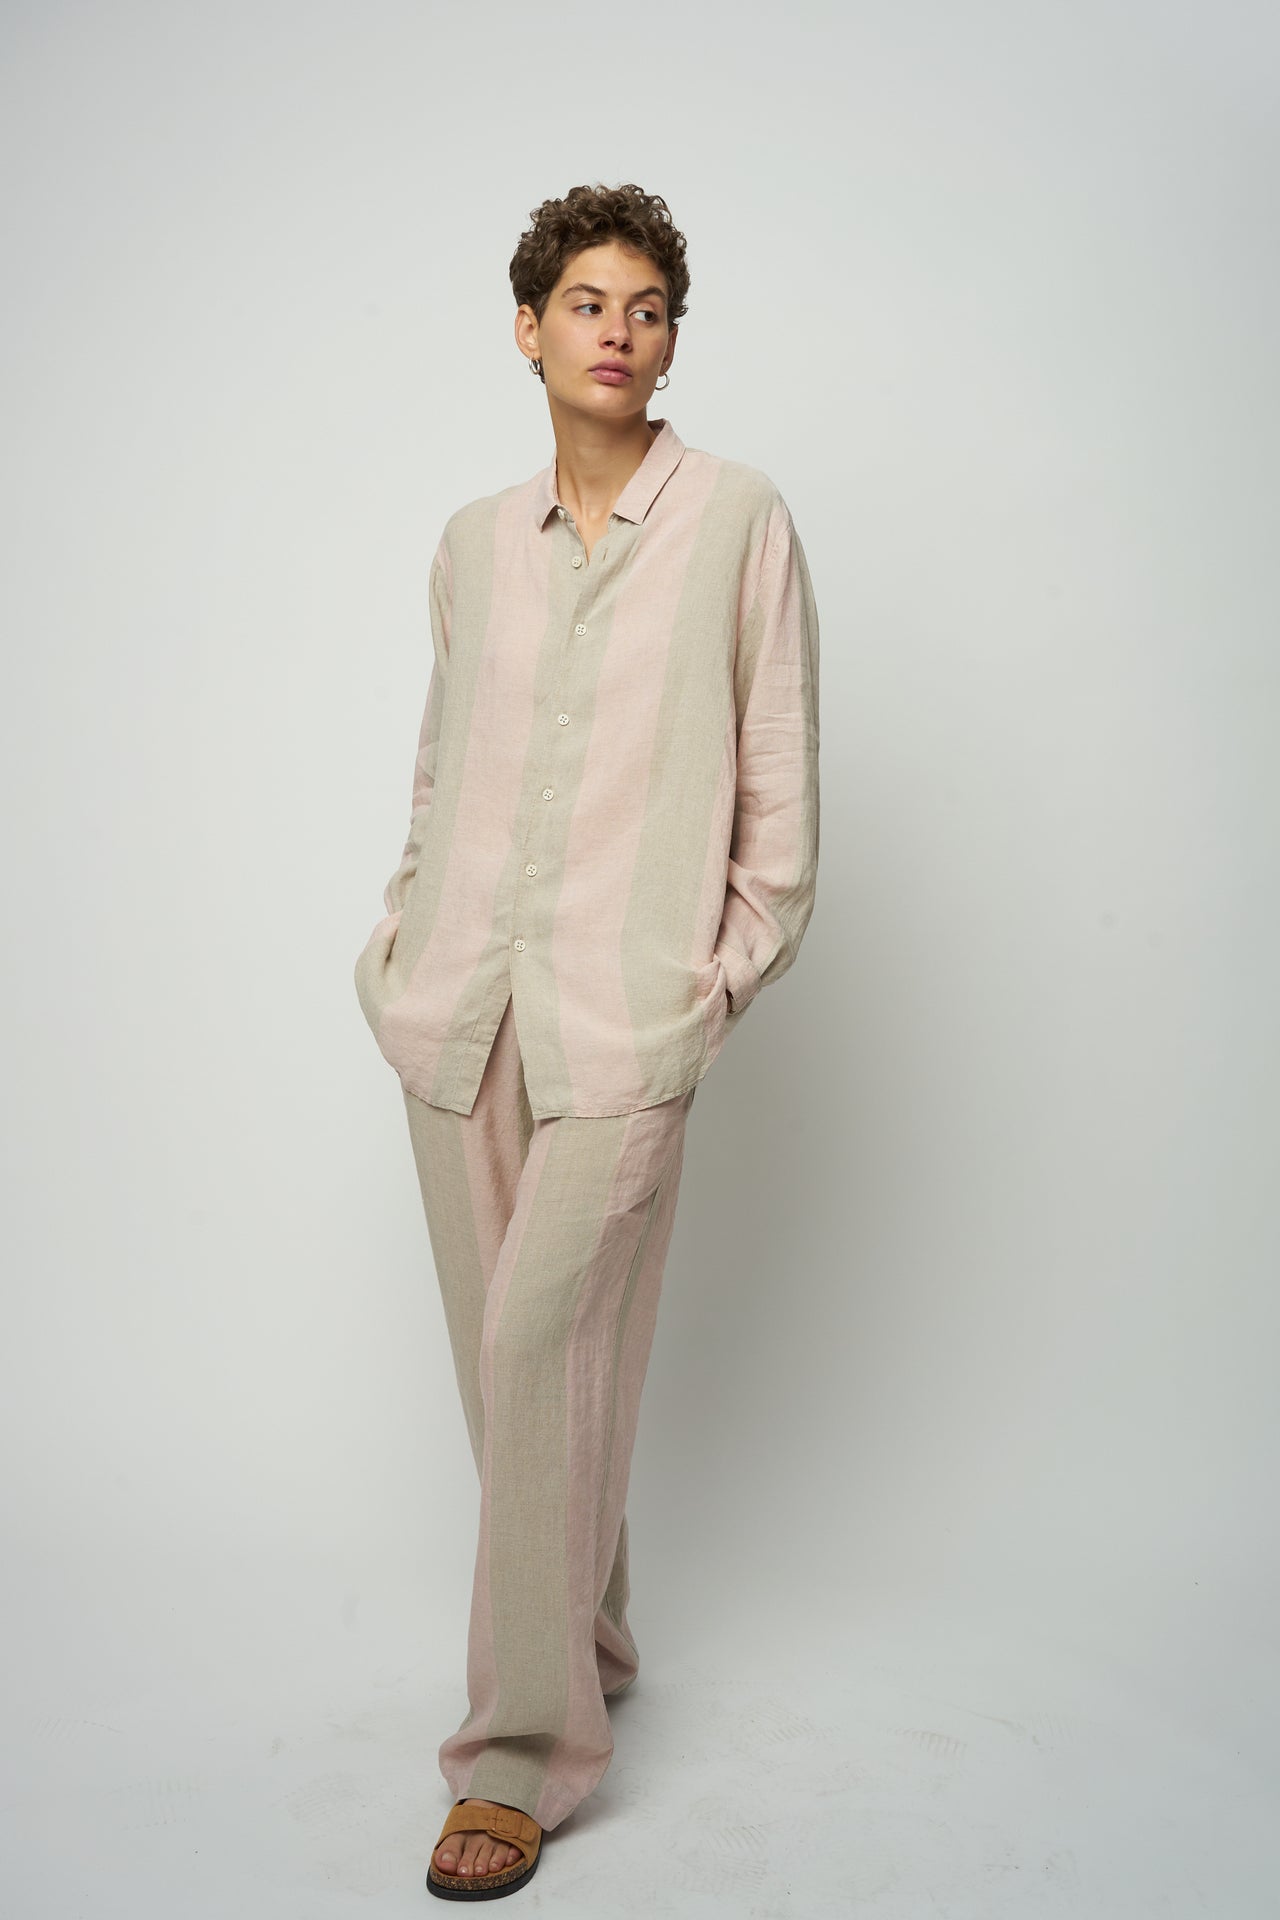 Long Sleeve Oversized Boxy Collar Shirt in Tonal Pink and Beige Stripes of a Superb Italian Traceable Linen